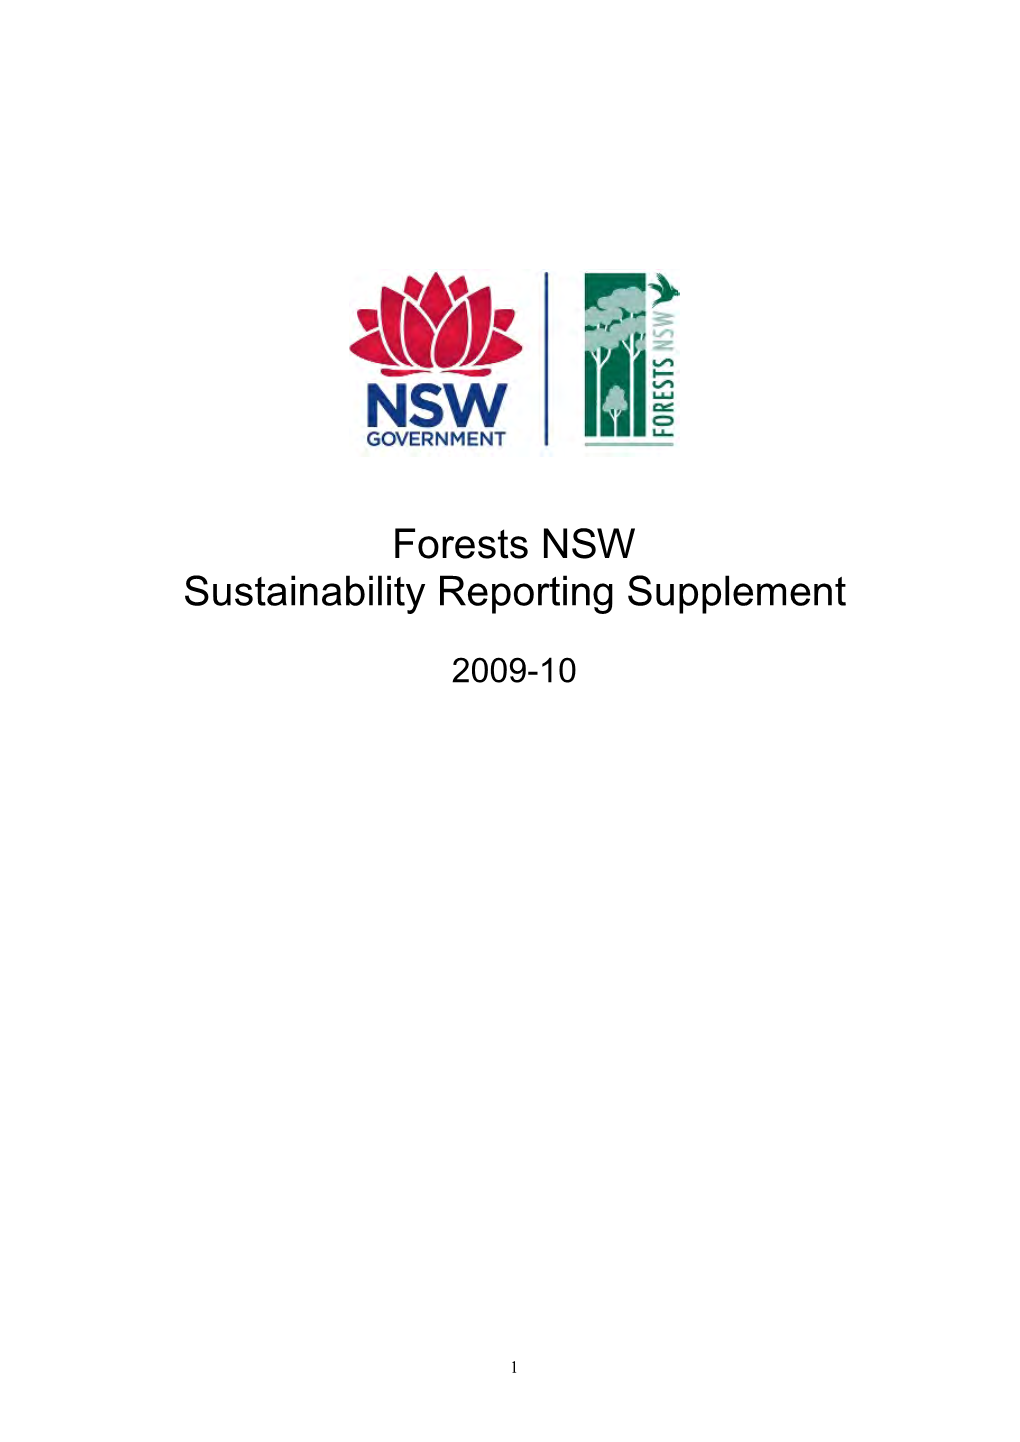 Forests NSW Sustainability Reporting Supplement 2009-10